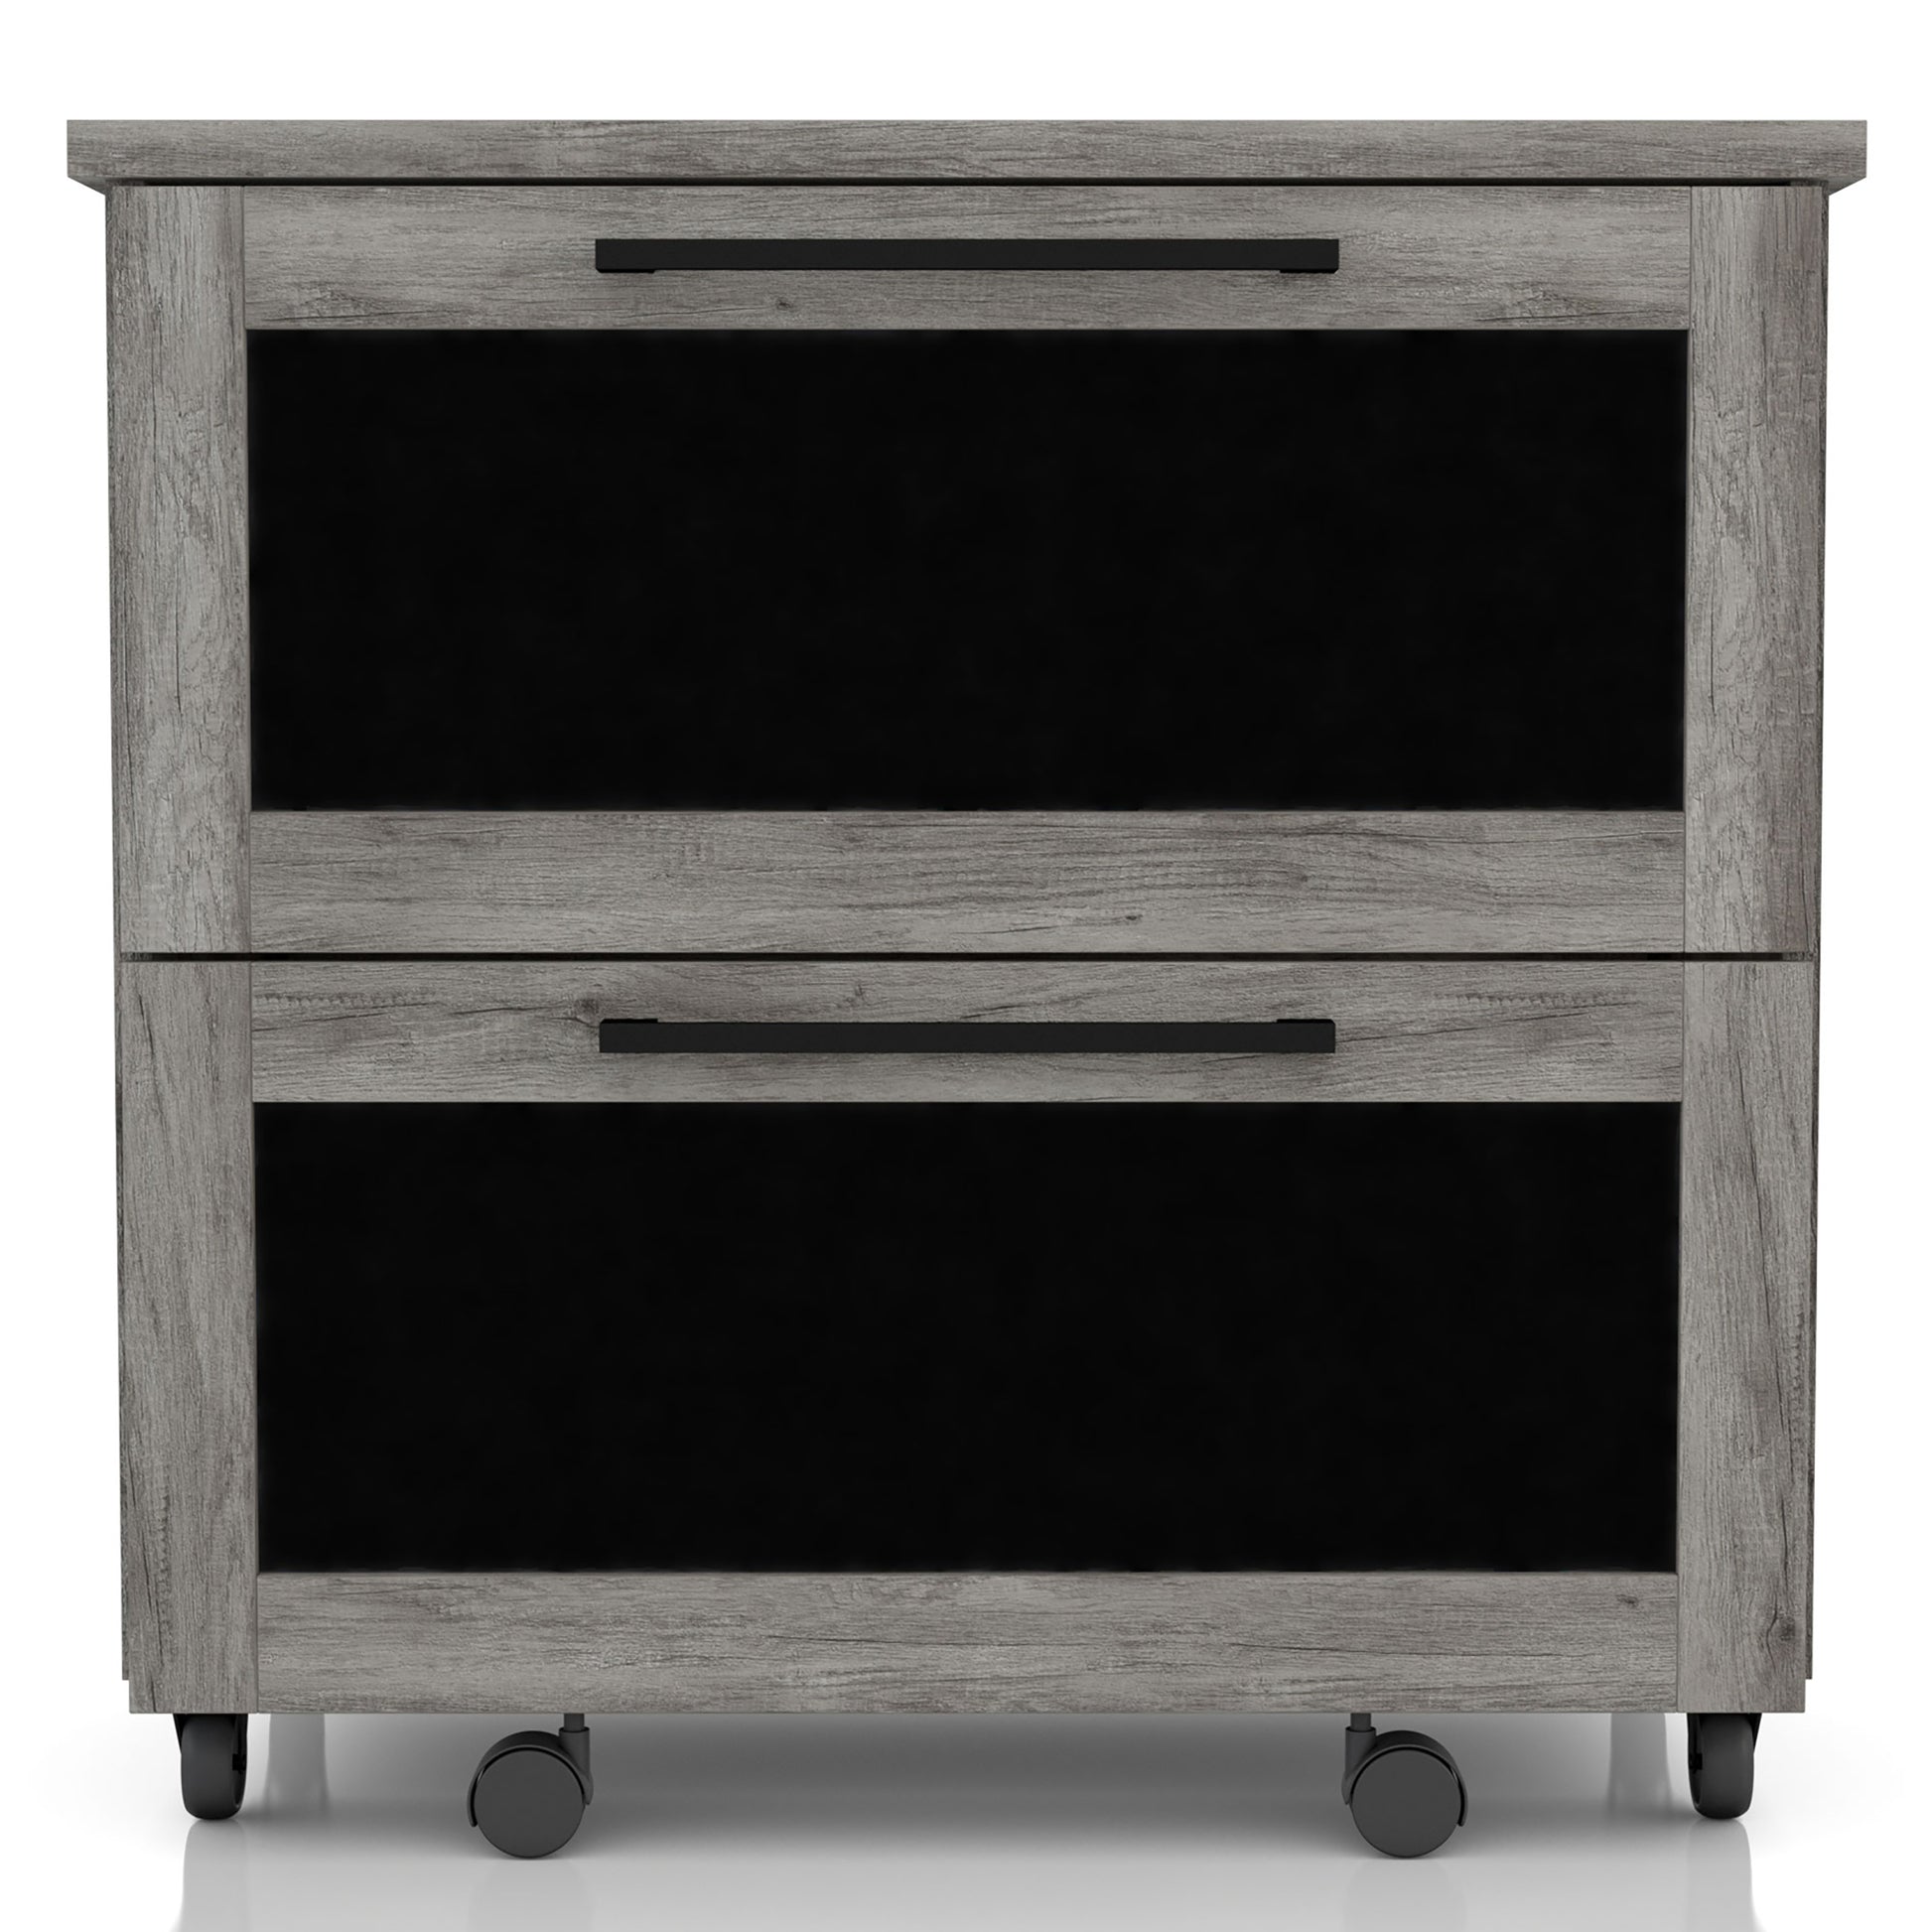 Front-facing rustic vintage gray oak two-drawer mobile filing cabinet with chalkboard drawer fronts on a white background